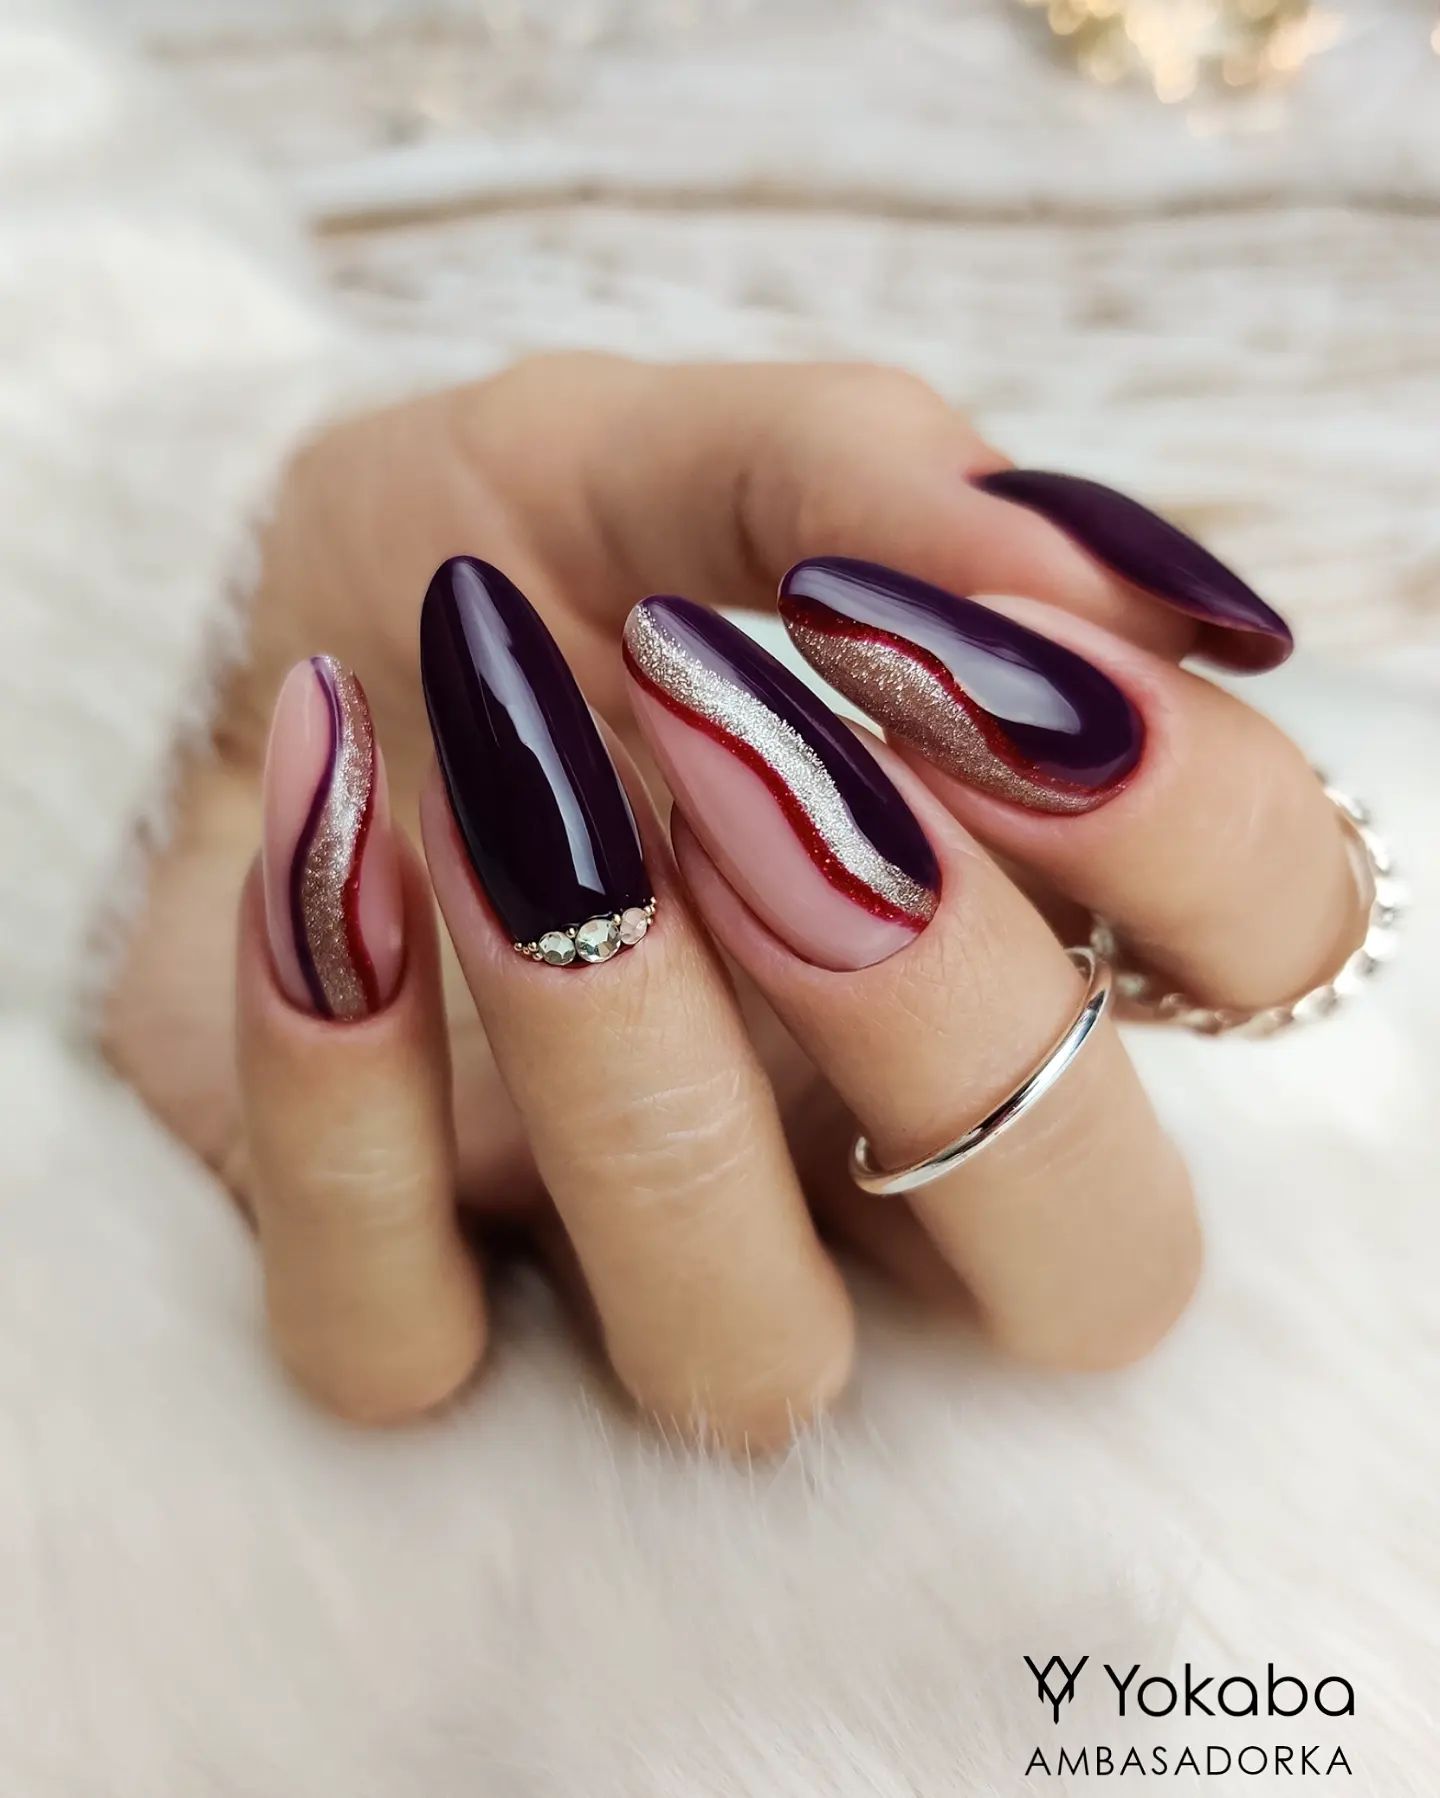 Long Burgundy Nails with Crystals and Silver Swirls